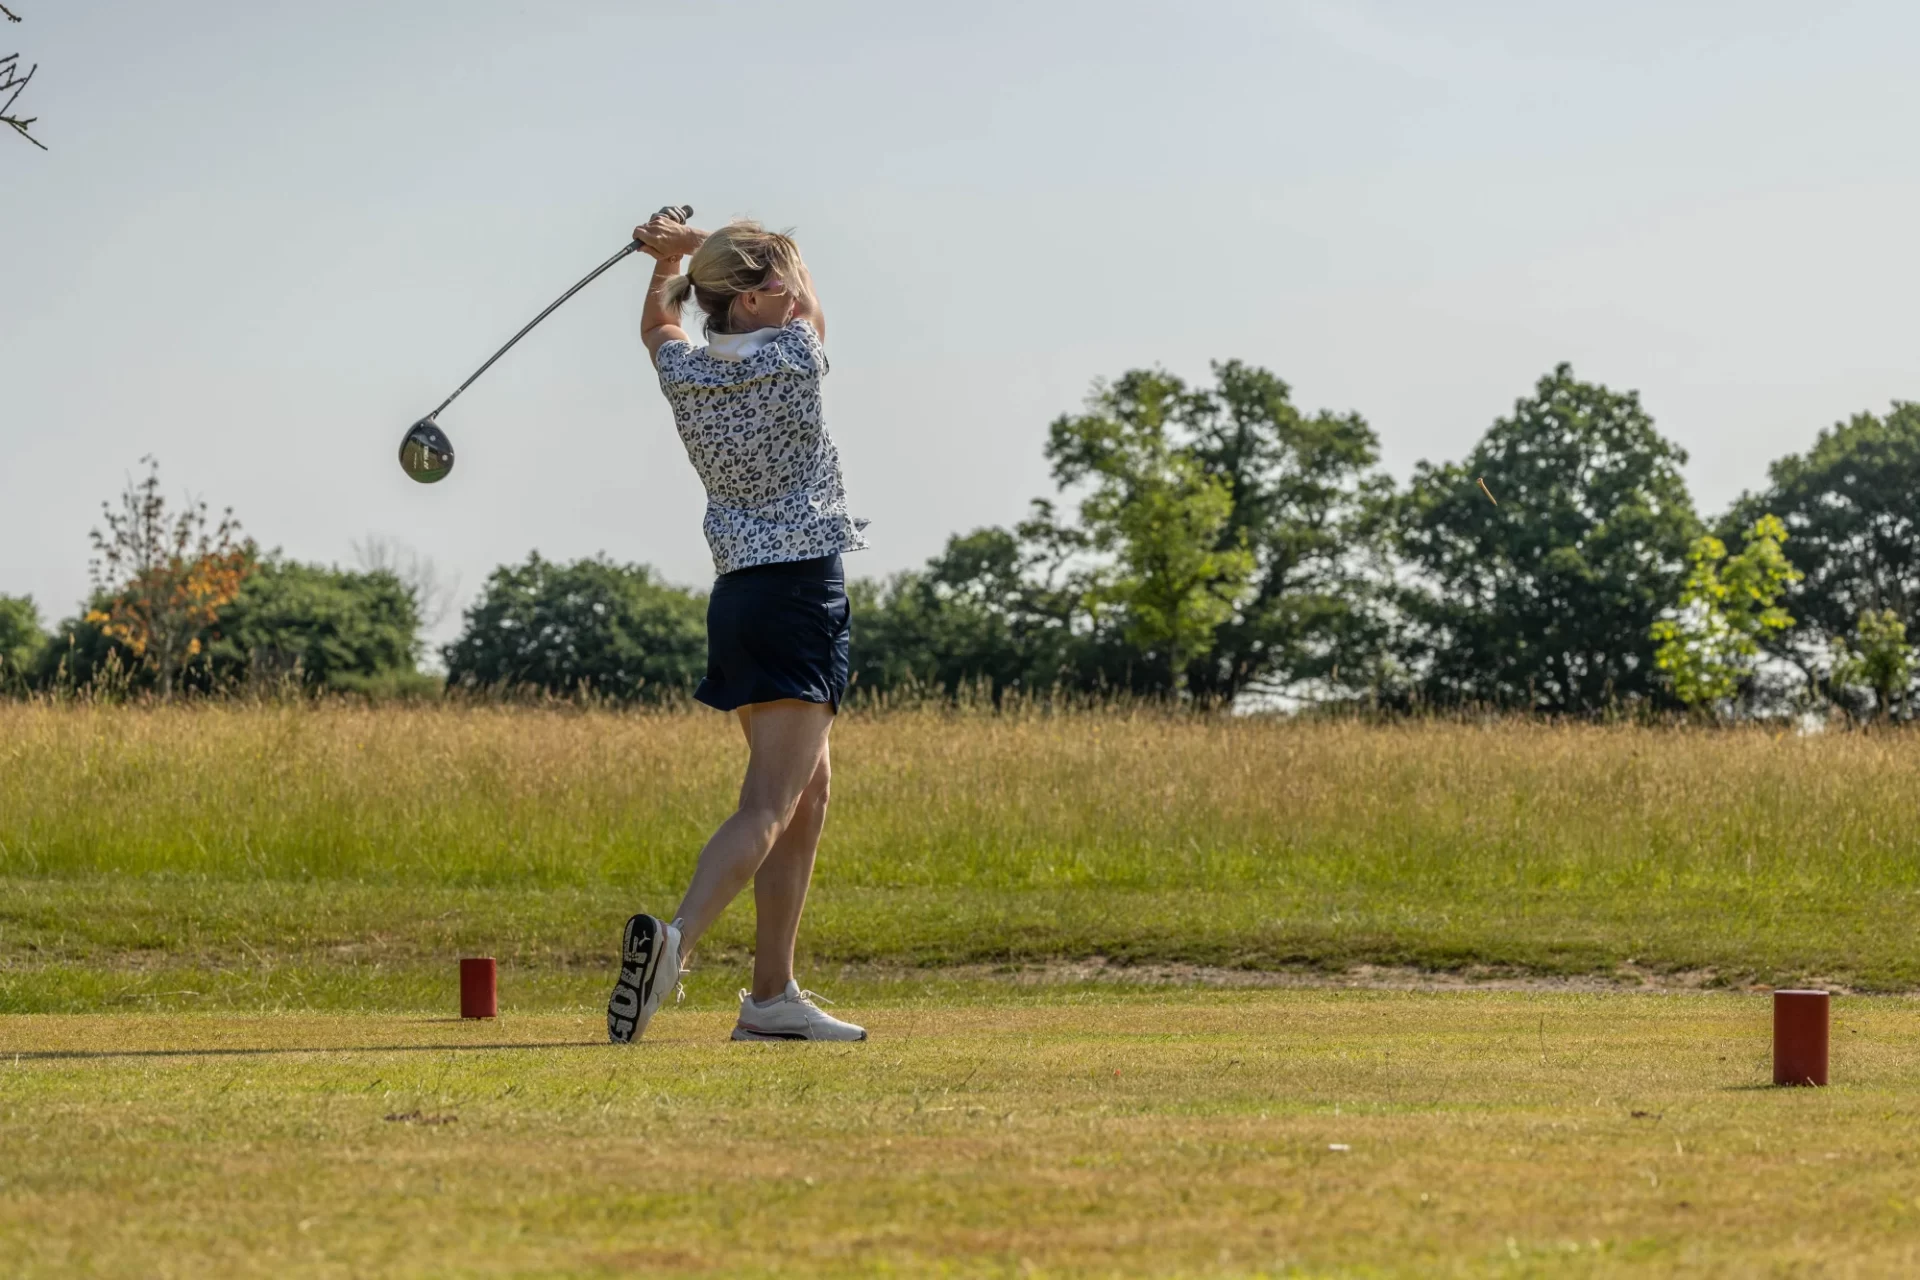 Simplify Consulting Annual Golf Day at Hamptworth